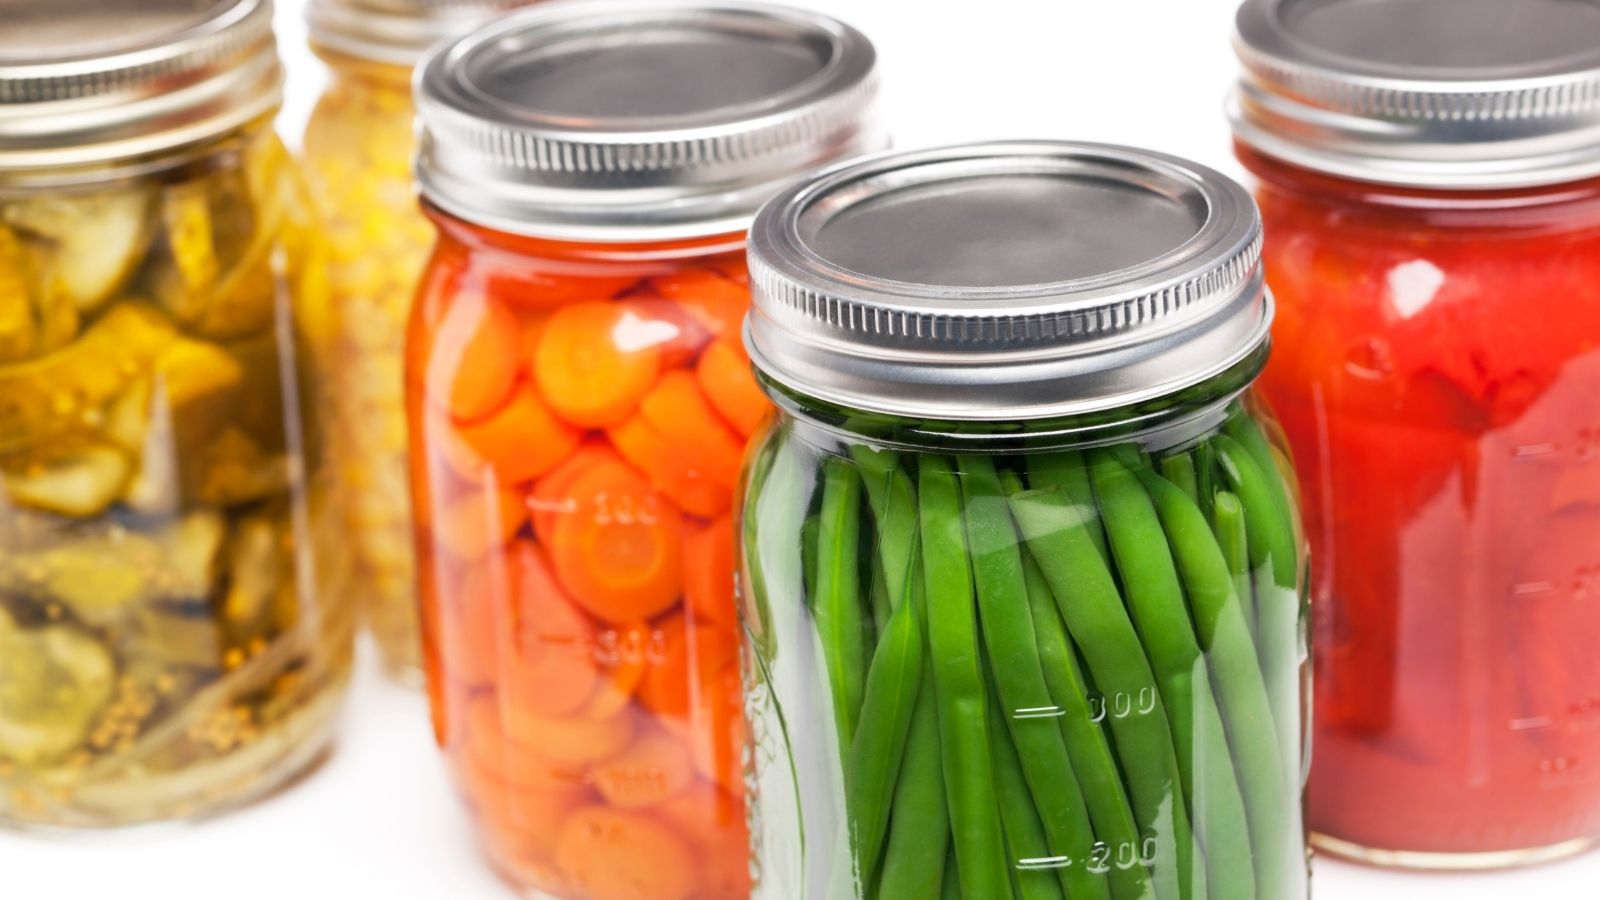 jars of home canned food